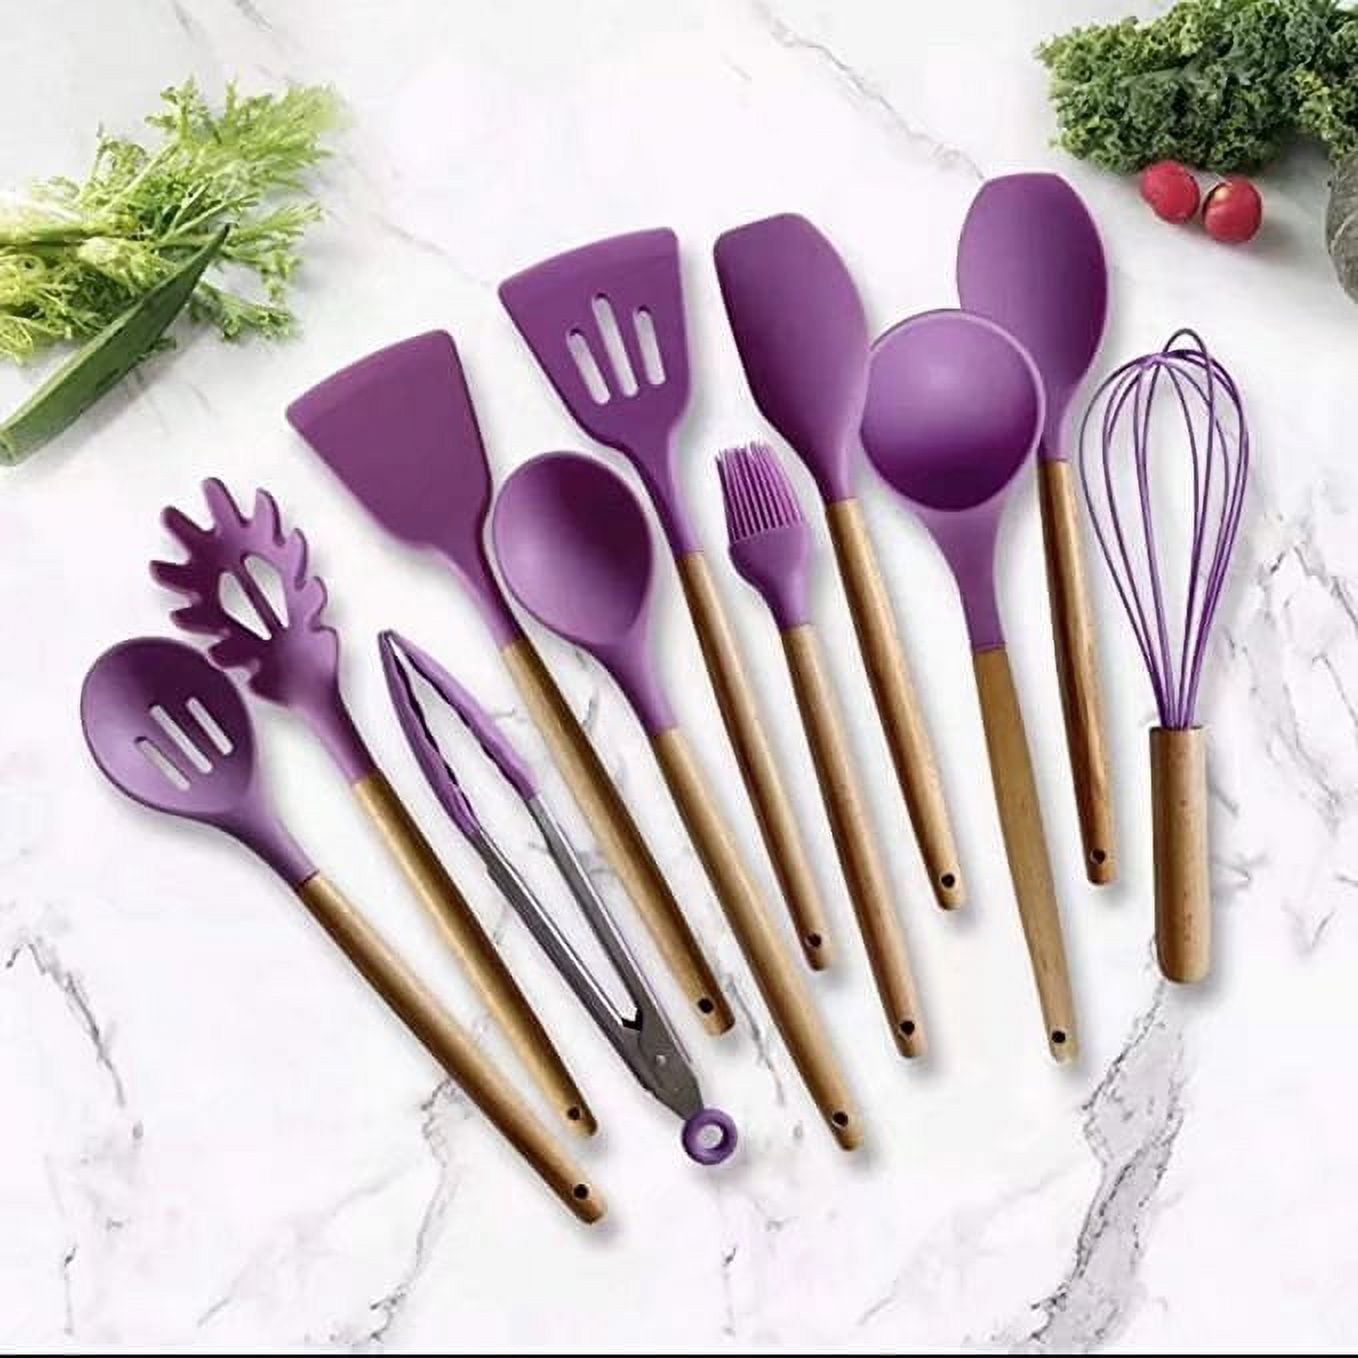 Silicone Cooking Kitchen Utensils Set with Holder - 12 Pcs